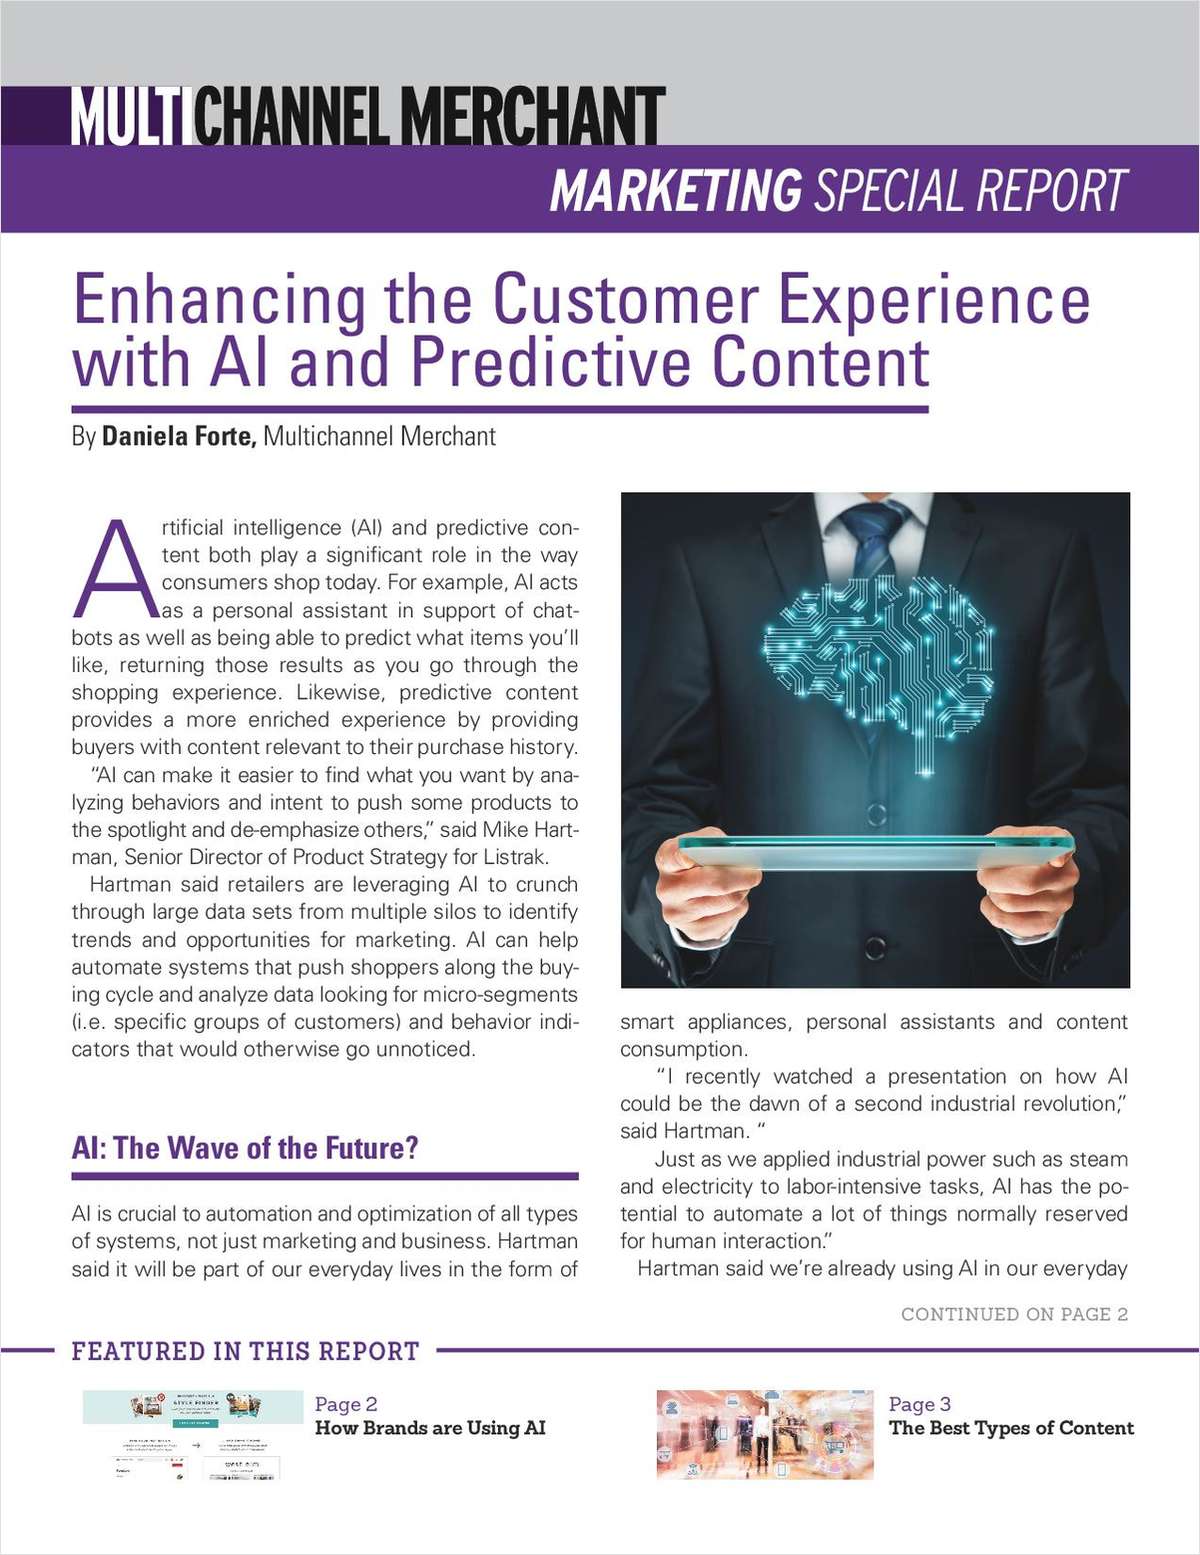 How to Enhance the Customer Experience with AI and Predictive Content